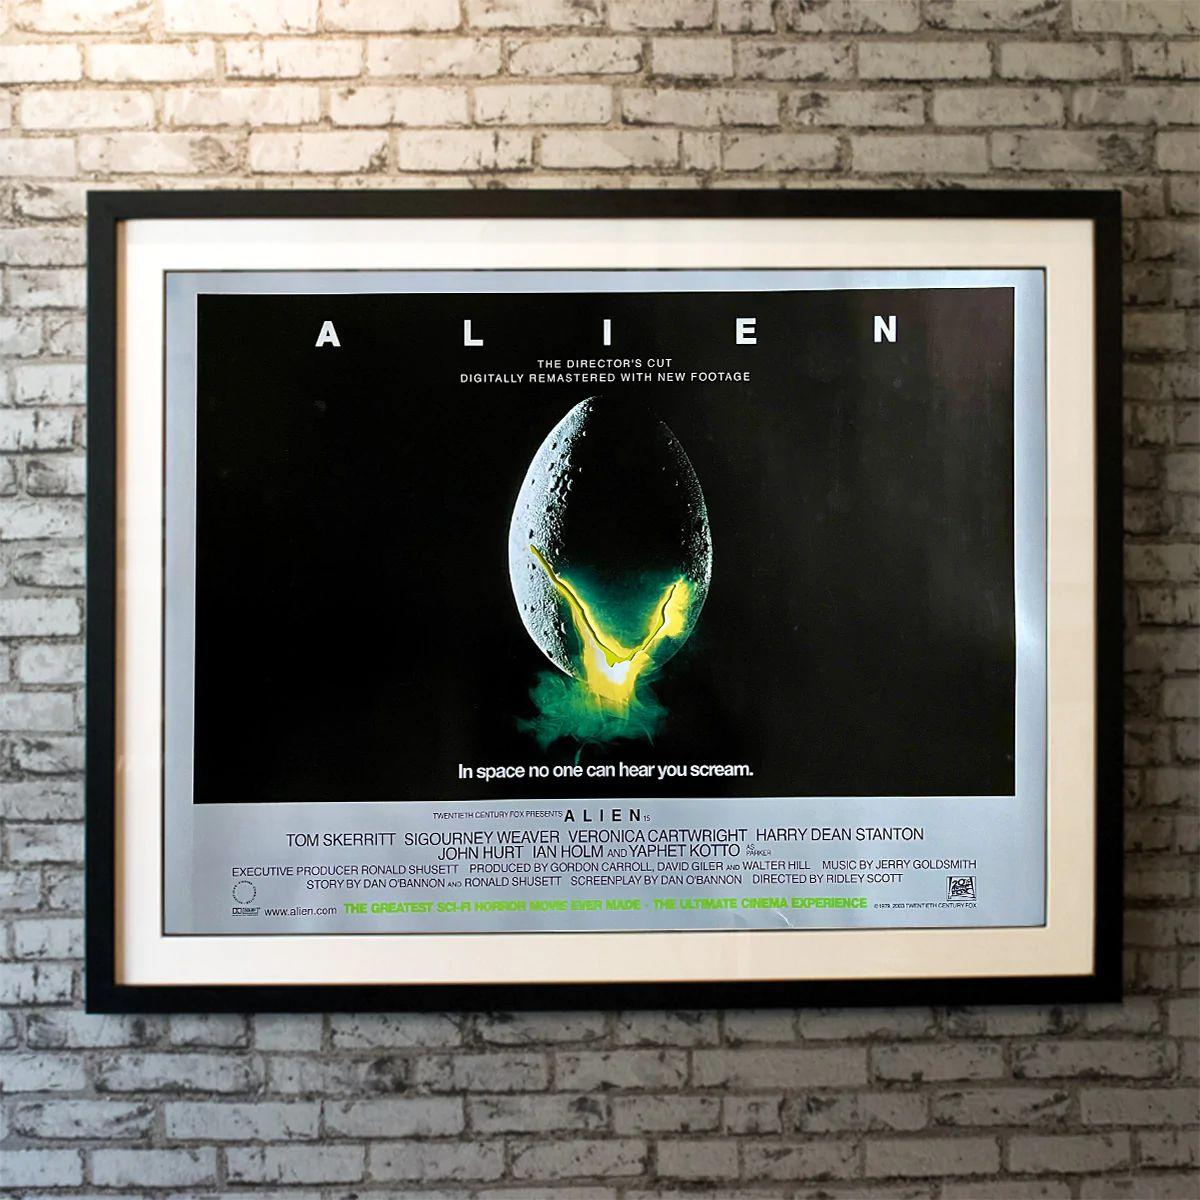 Alien - Director's Cut, Unframed Poster, 2003R

Original British Quad (30 X 40 Inches). The crew of a commercial spacecraft encounter a deadly life-form after investigating an unknown transmission.

Year: 2003R
Nationality: United